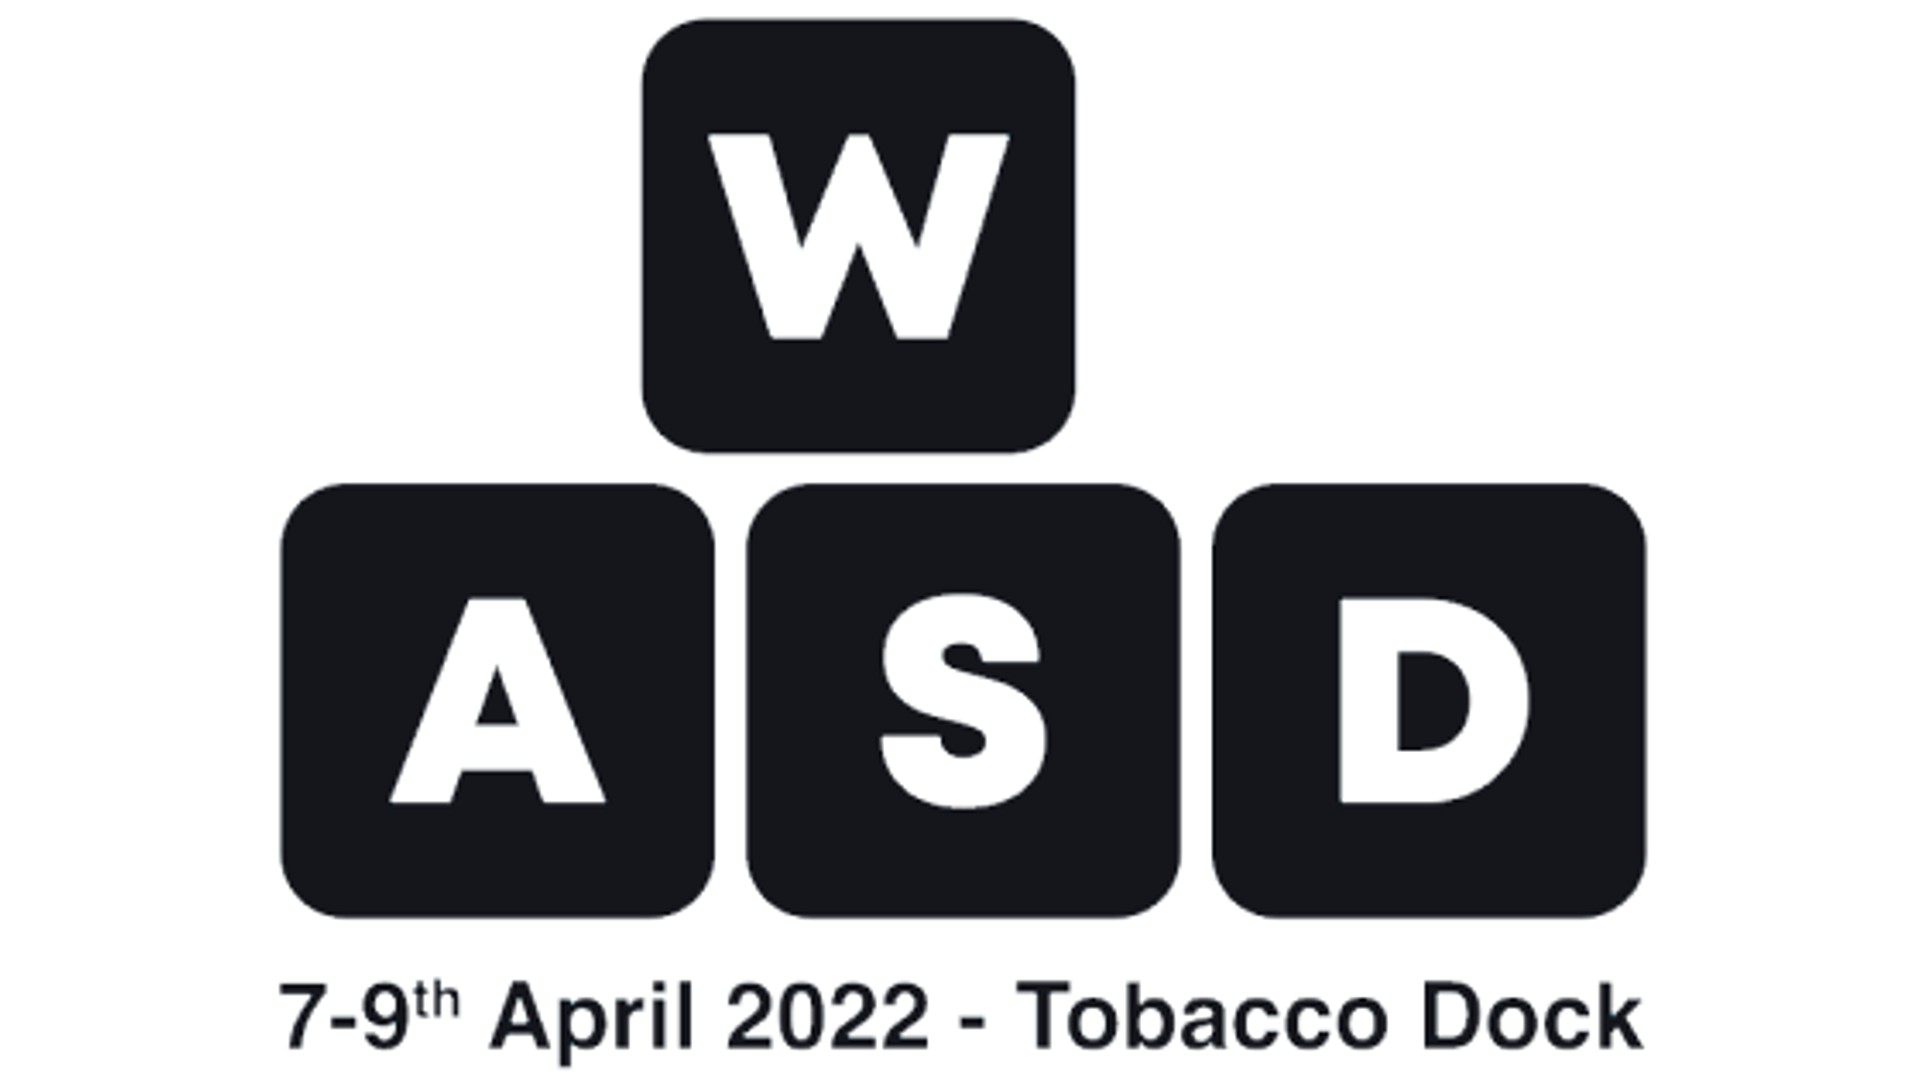 W.A.S.D is a new consumer videogame event that comes to London next year